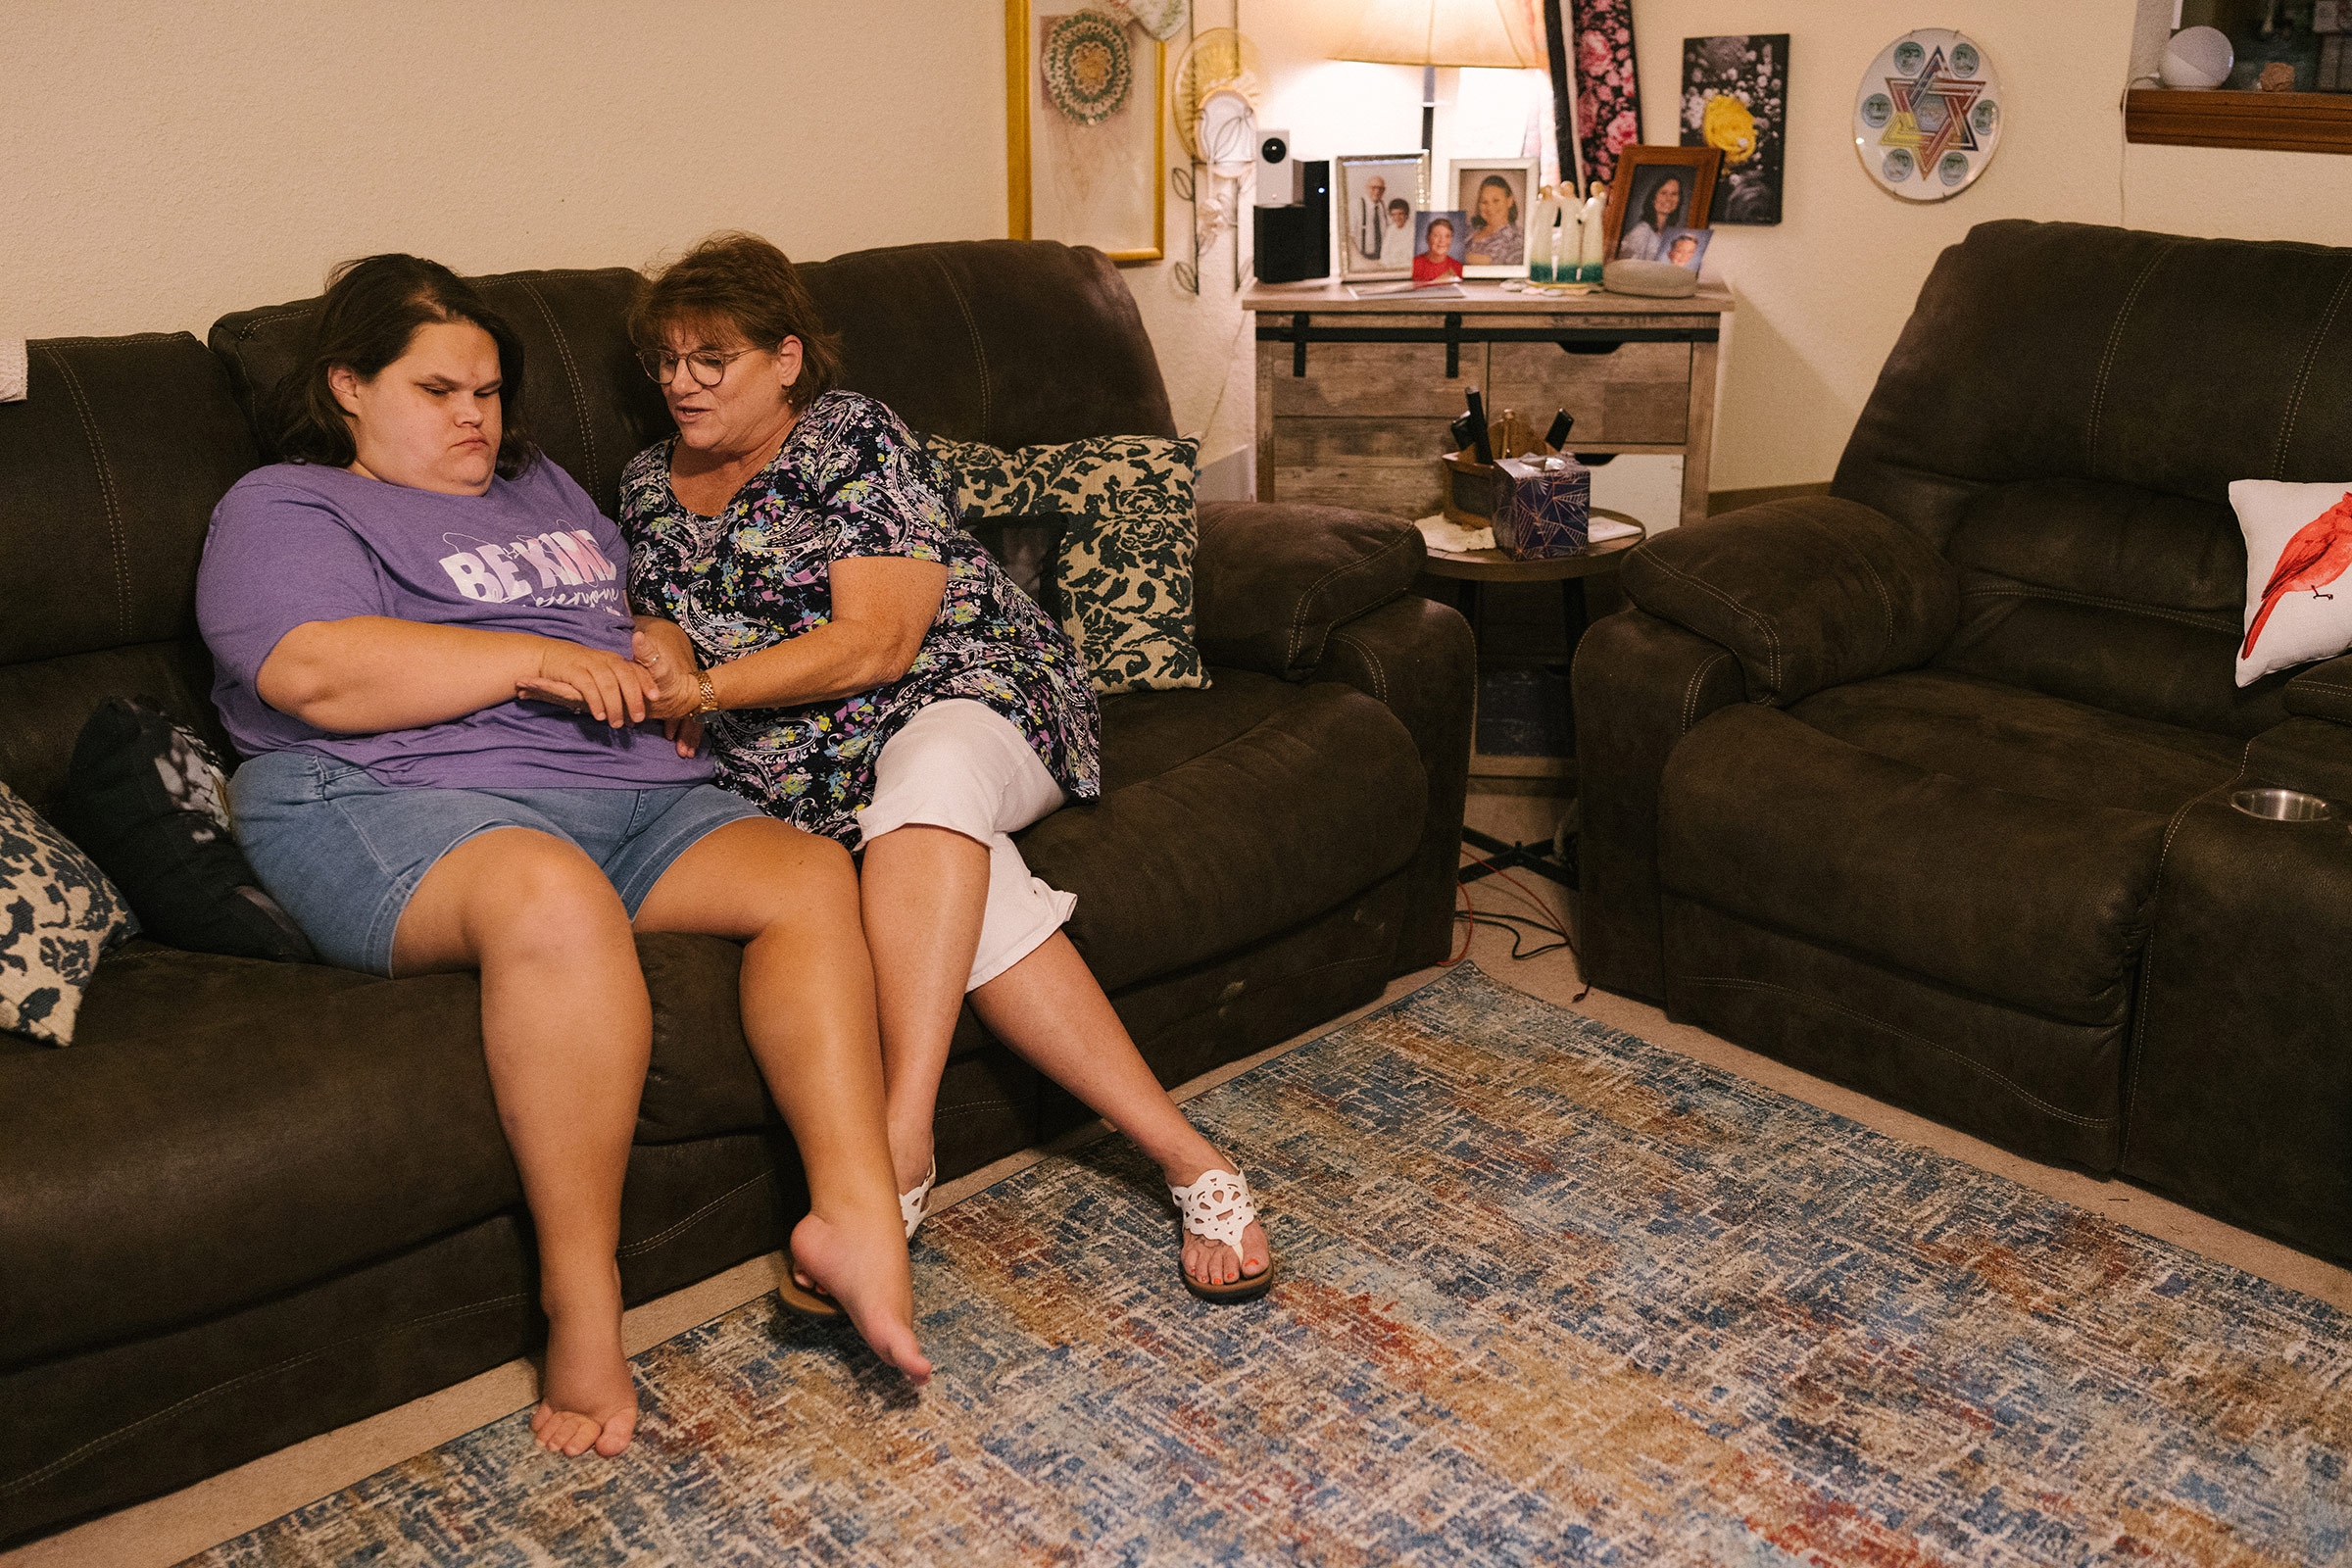 Wanda Felty sits with her daughter Kayla in their home in Norman, Okla., on July 19, 2022. Kayla's brain did not fully form in utero; she is mostly non-verbal and has significant visual impairment, among other medical issues. Felty and her husband are Kayla's primary caretakers. (Morgan Lieberman)